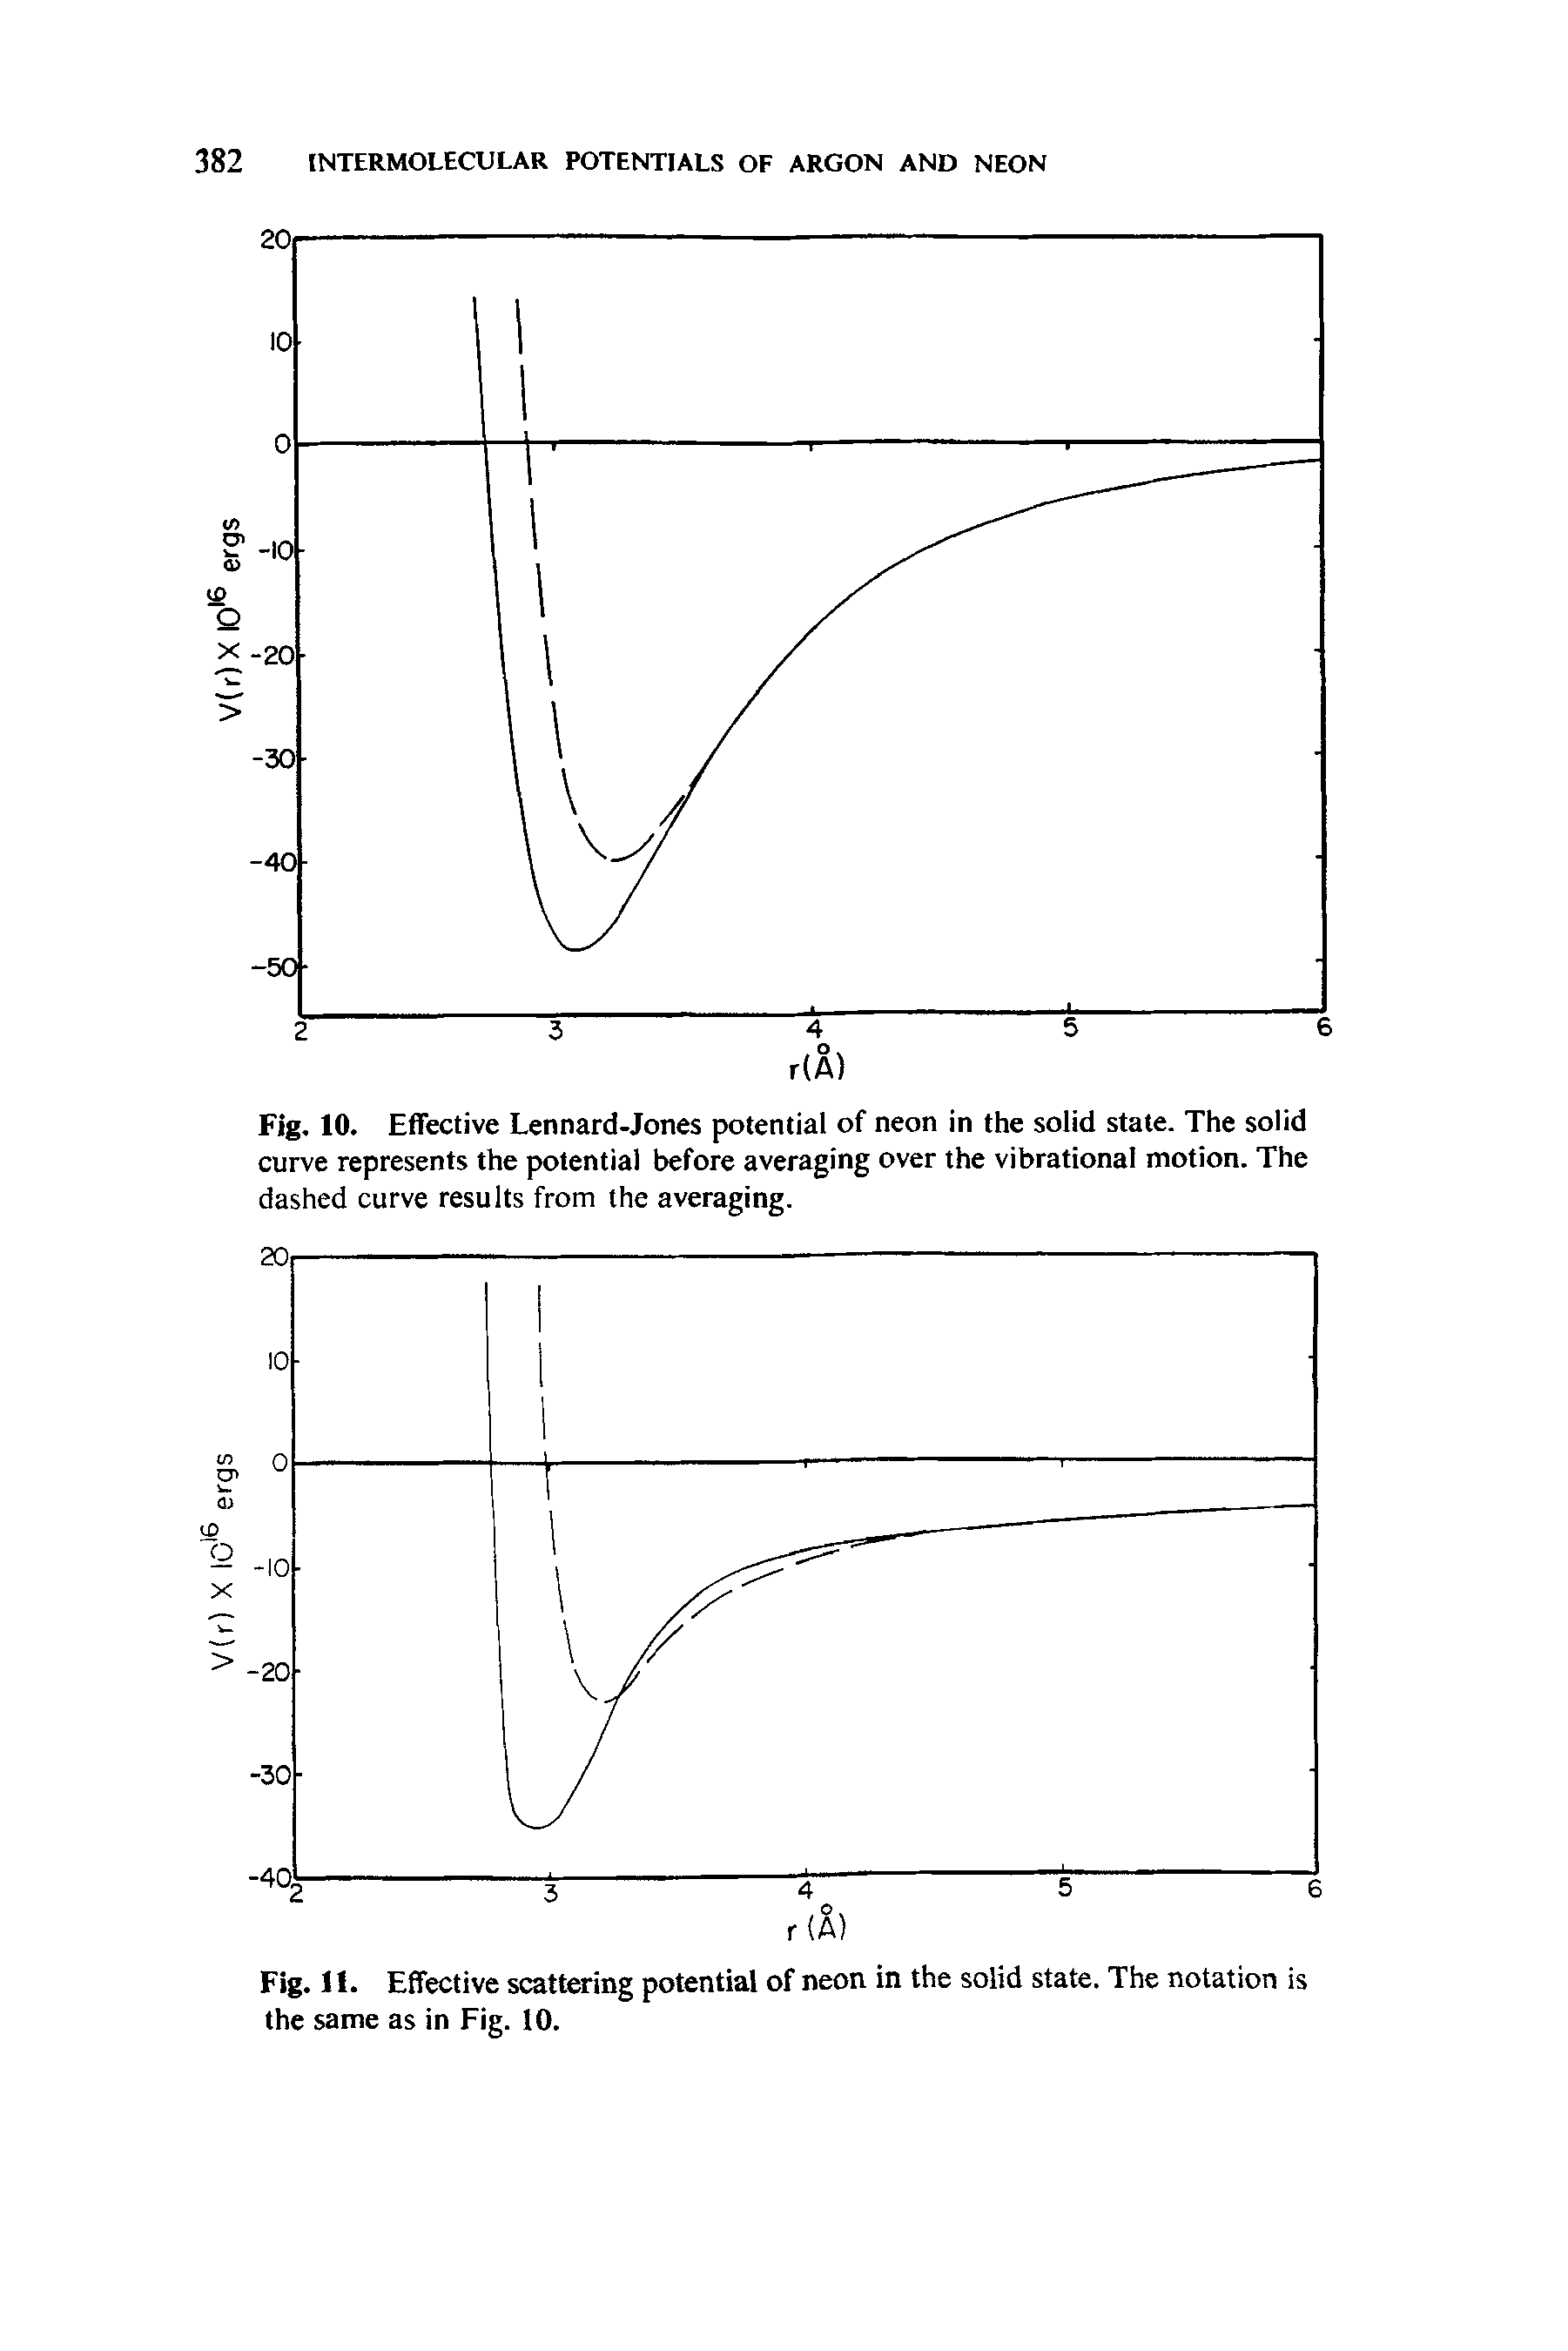 Fig. 10. Effective Lennard-Jones potential of neon in the solid state. The solid curve represents the potential before averaging over the vibrational motion. The dashed curve results from the averaging.